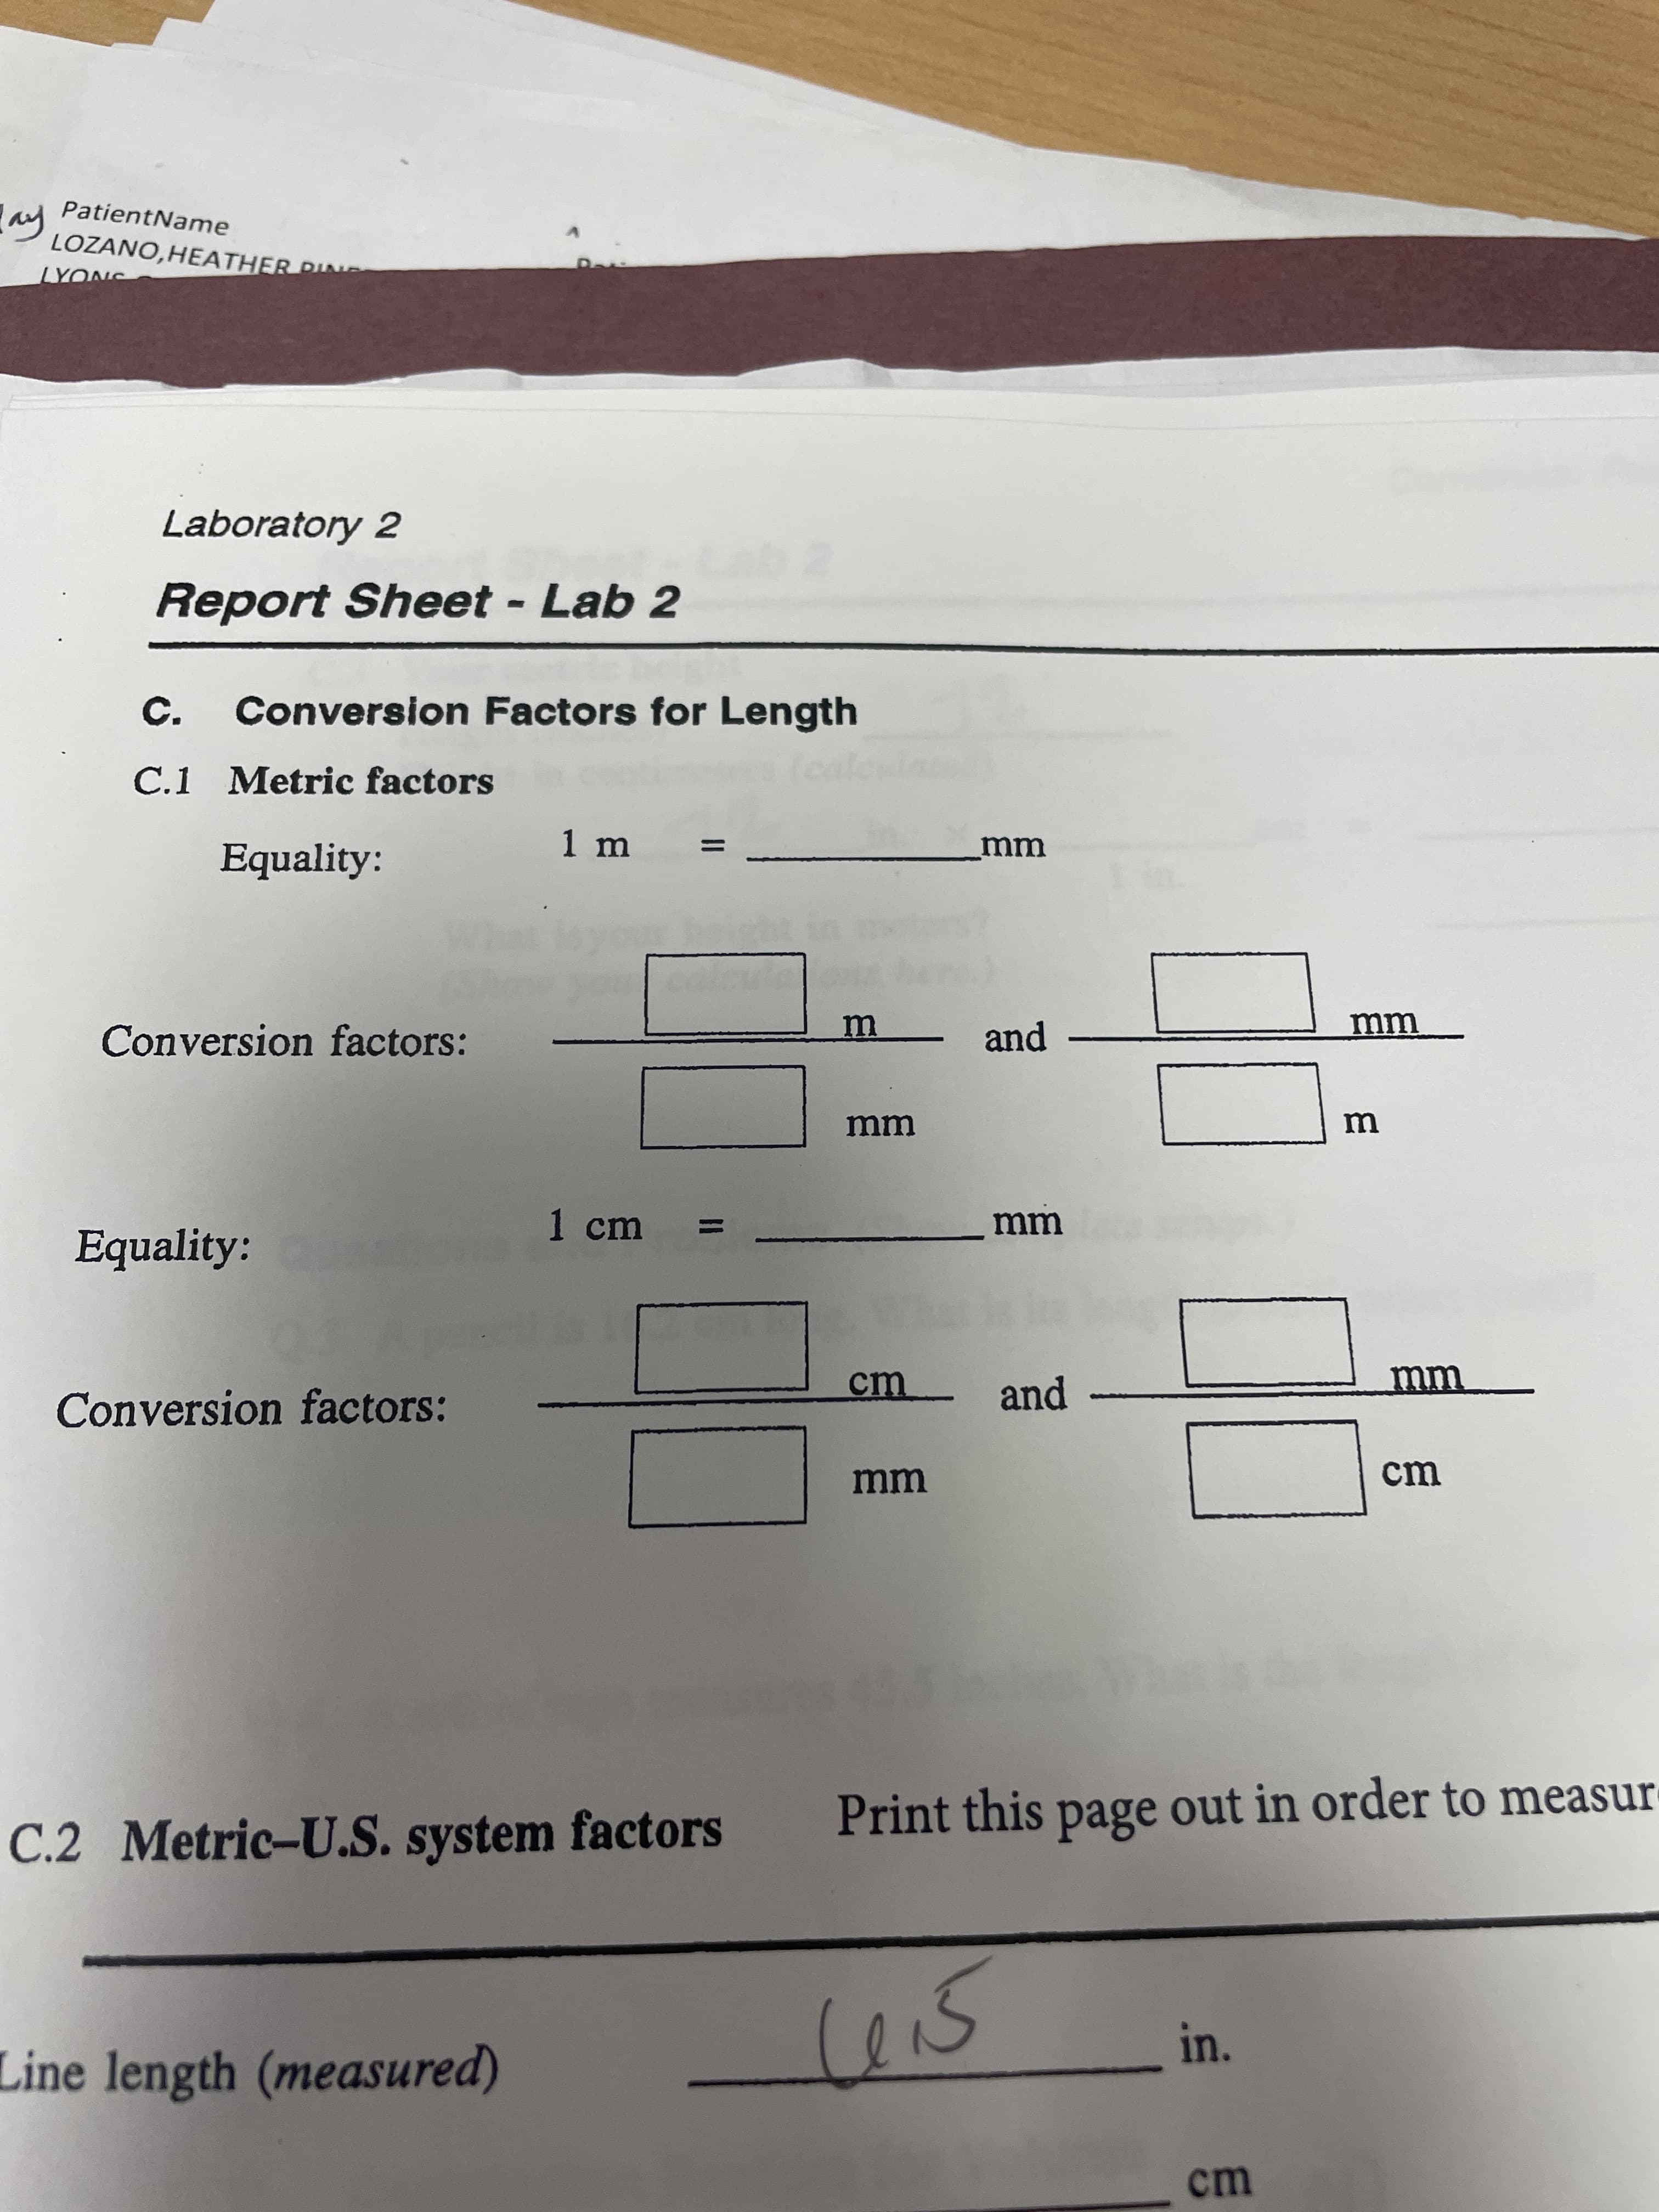 in.
PatientName
ay
LOZANO,HEATHER DNG
Laboratory 2
Report Sheet - Lab 2
C.
Conversion Factors for Length
C.1 Metric factors
1 m
Equality:
mm
Conversion factors:
and
|
1 cm
Equality:
cm
and
Conversion factors:
mm
cm
Print this page out in order to measur
C.2 Metric-U.S. system factors
Line length (measured)
